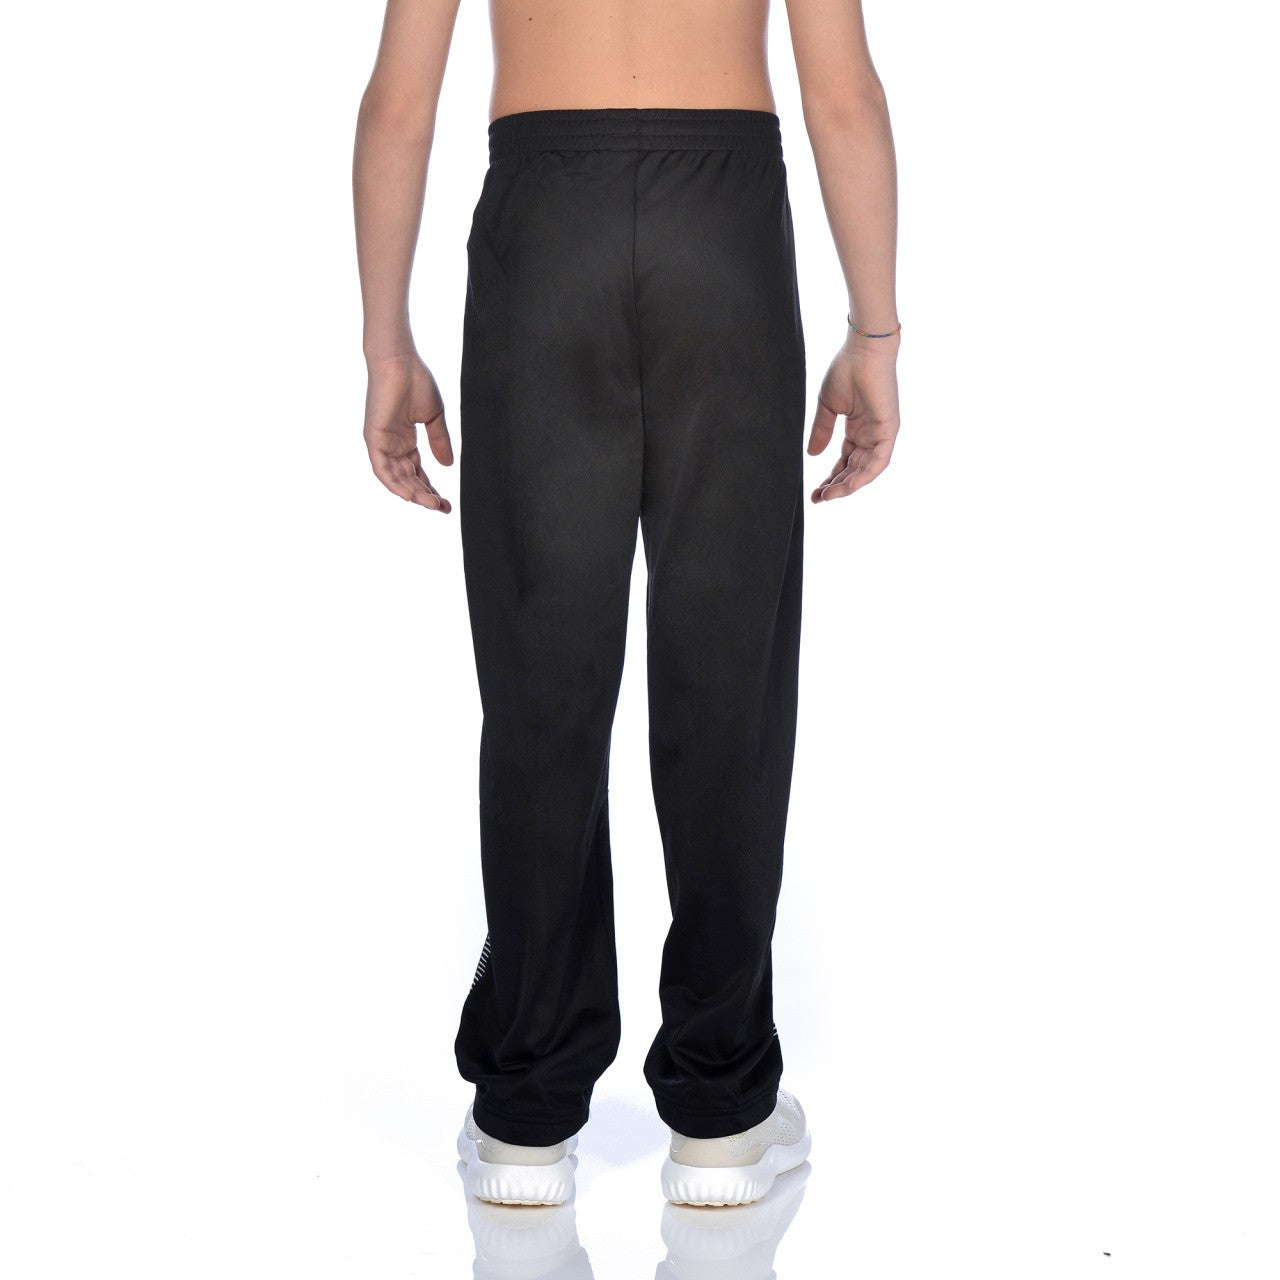 Jr Tl Knitted Poly Pant black